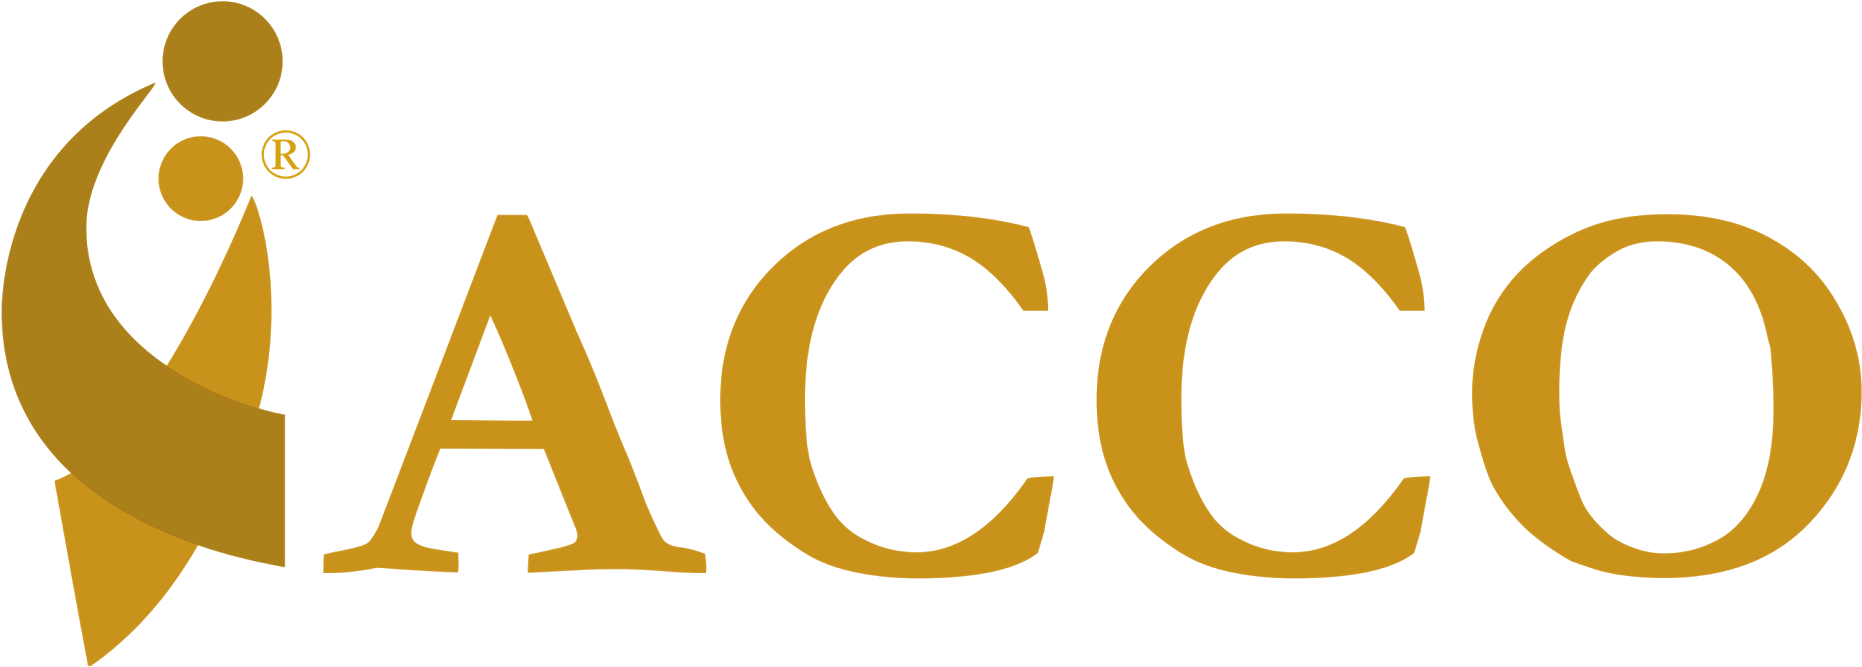 Acco Offers Free Books & Resources For Families Of - American Childhood Cancer Association (1919x775)